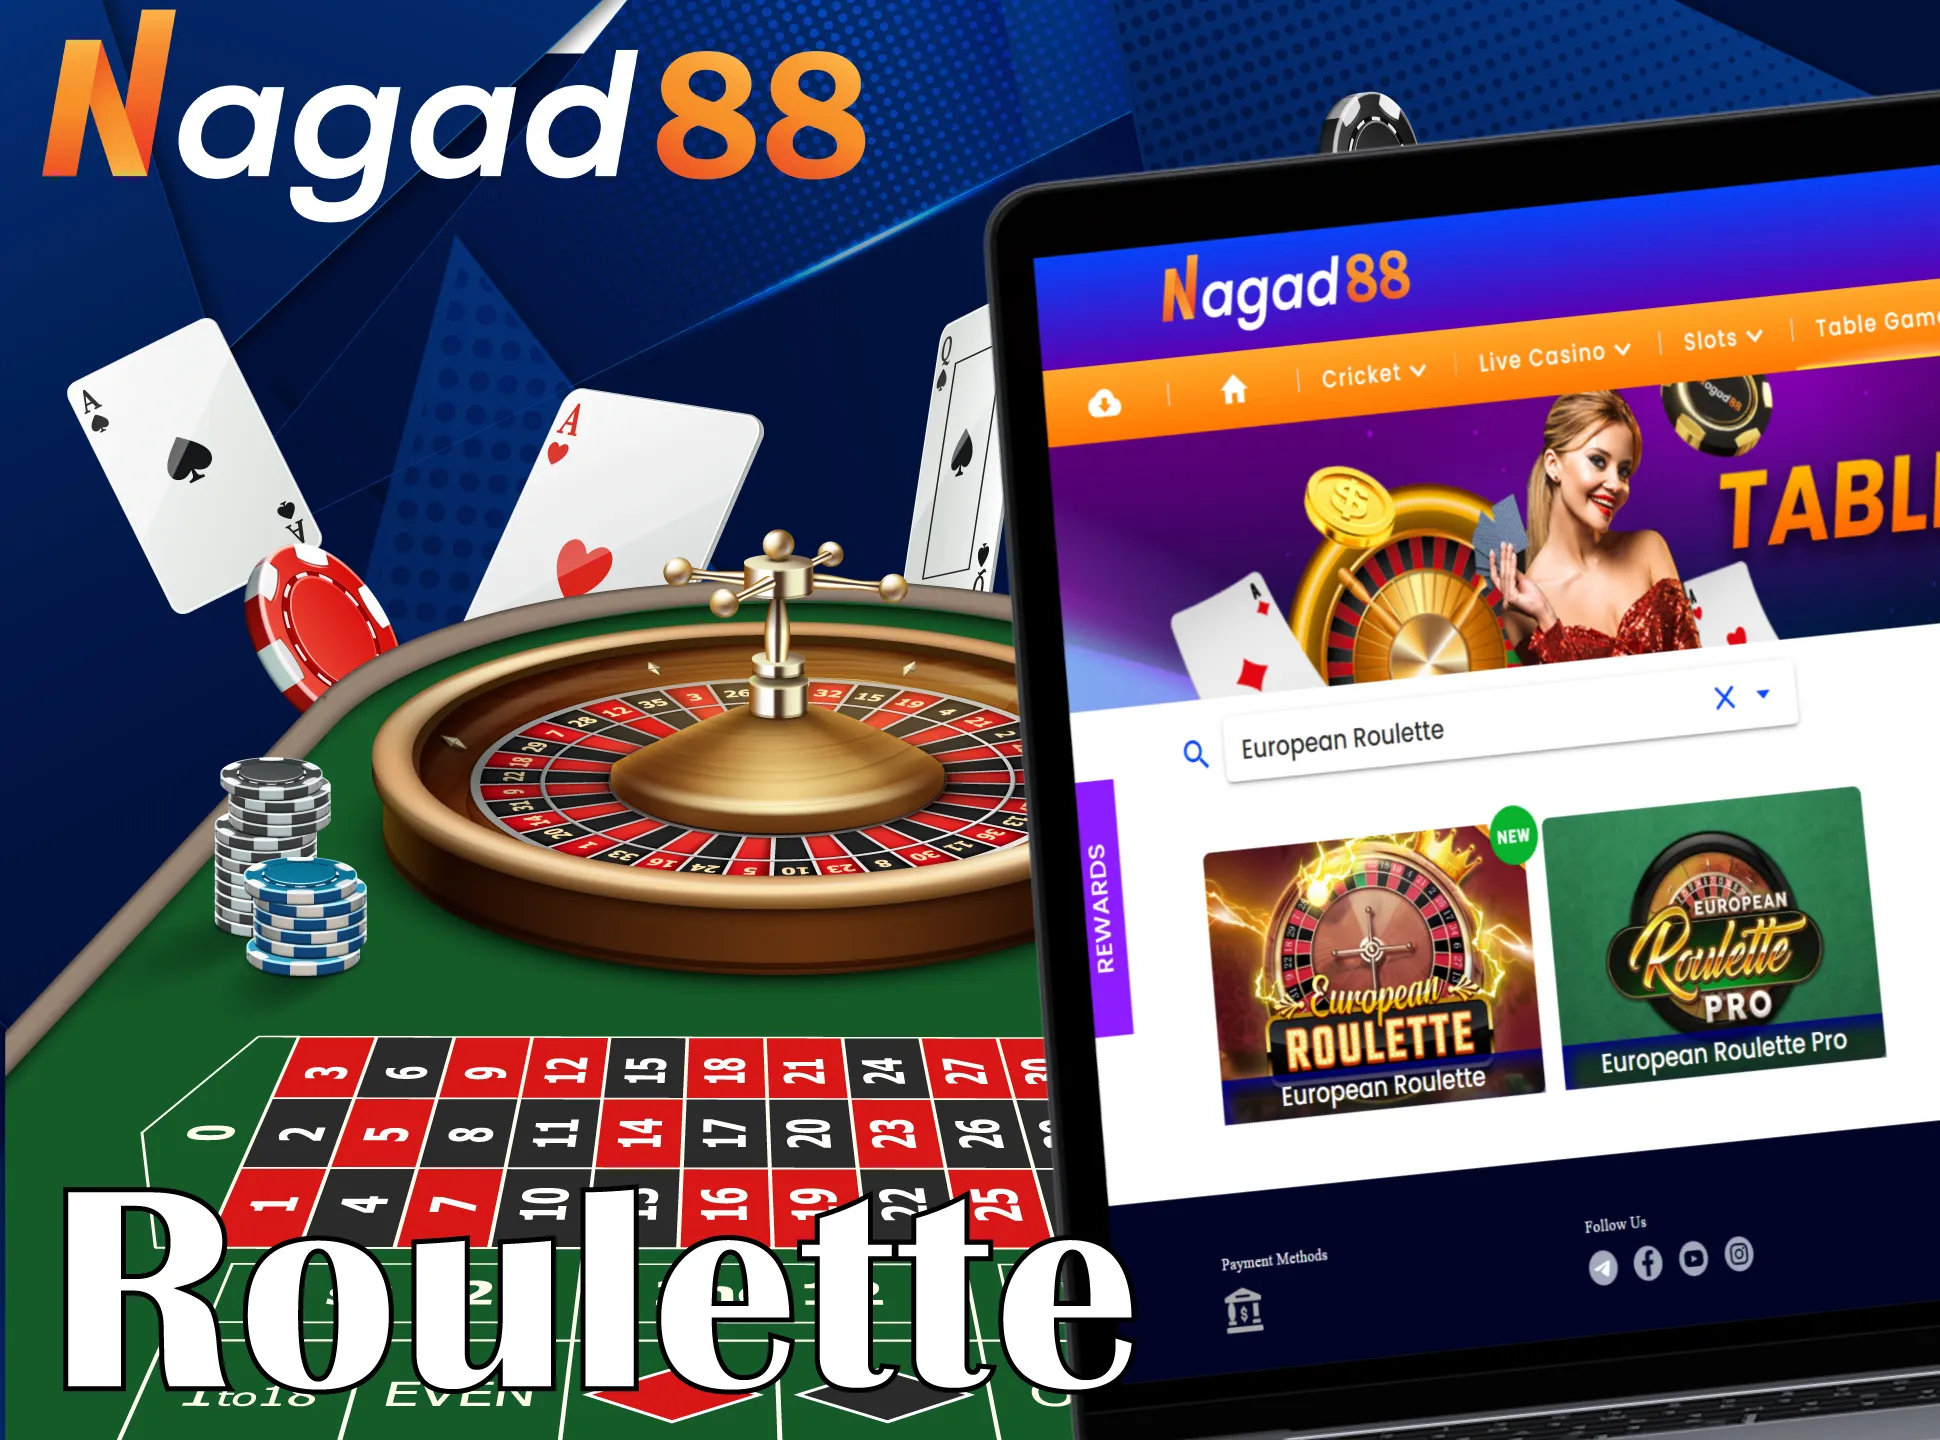 Try your luck playing roulette at Nagad88 Casino.